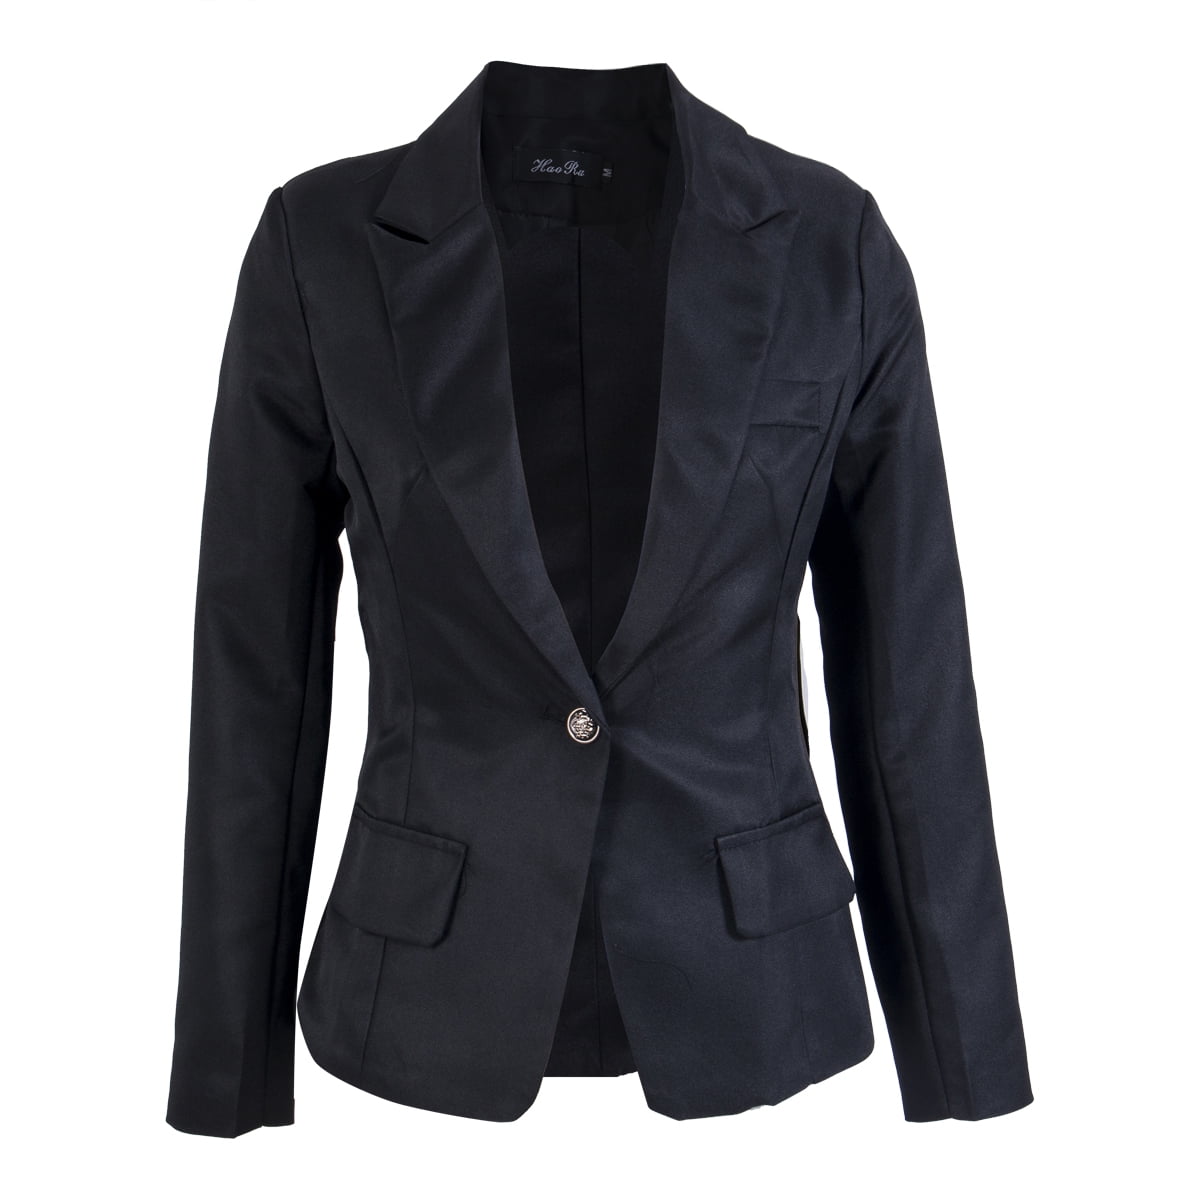 Dondup Synthetic Slim Fit Plain Buttoned Blazer in Black sport coats and suit jackets Womens Clothing Jackets Blazers 